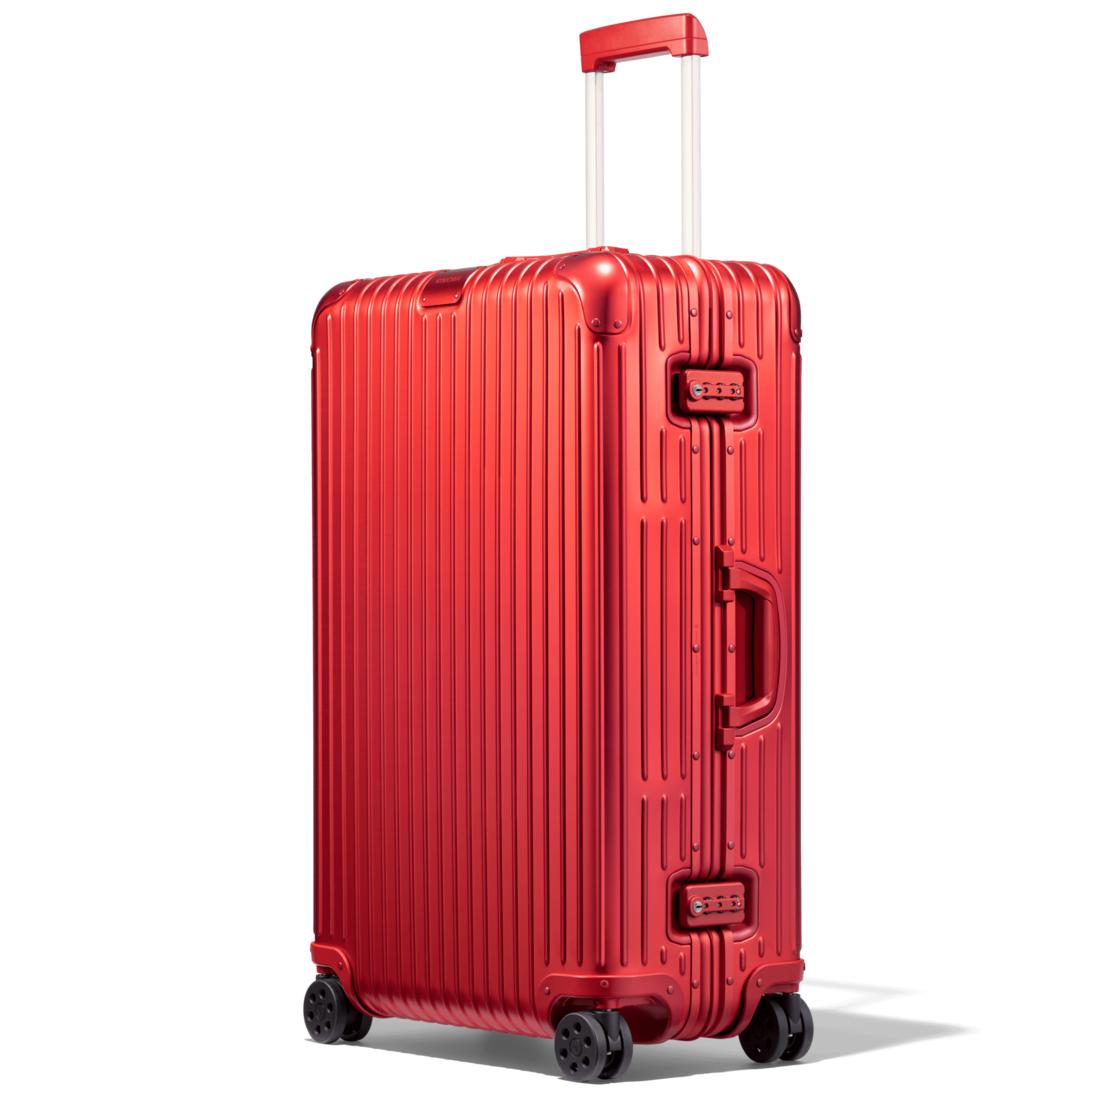 RIMOWA Original Check-in L Suitcase in Scarlet_gloss (Red) - Lyst